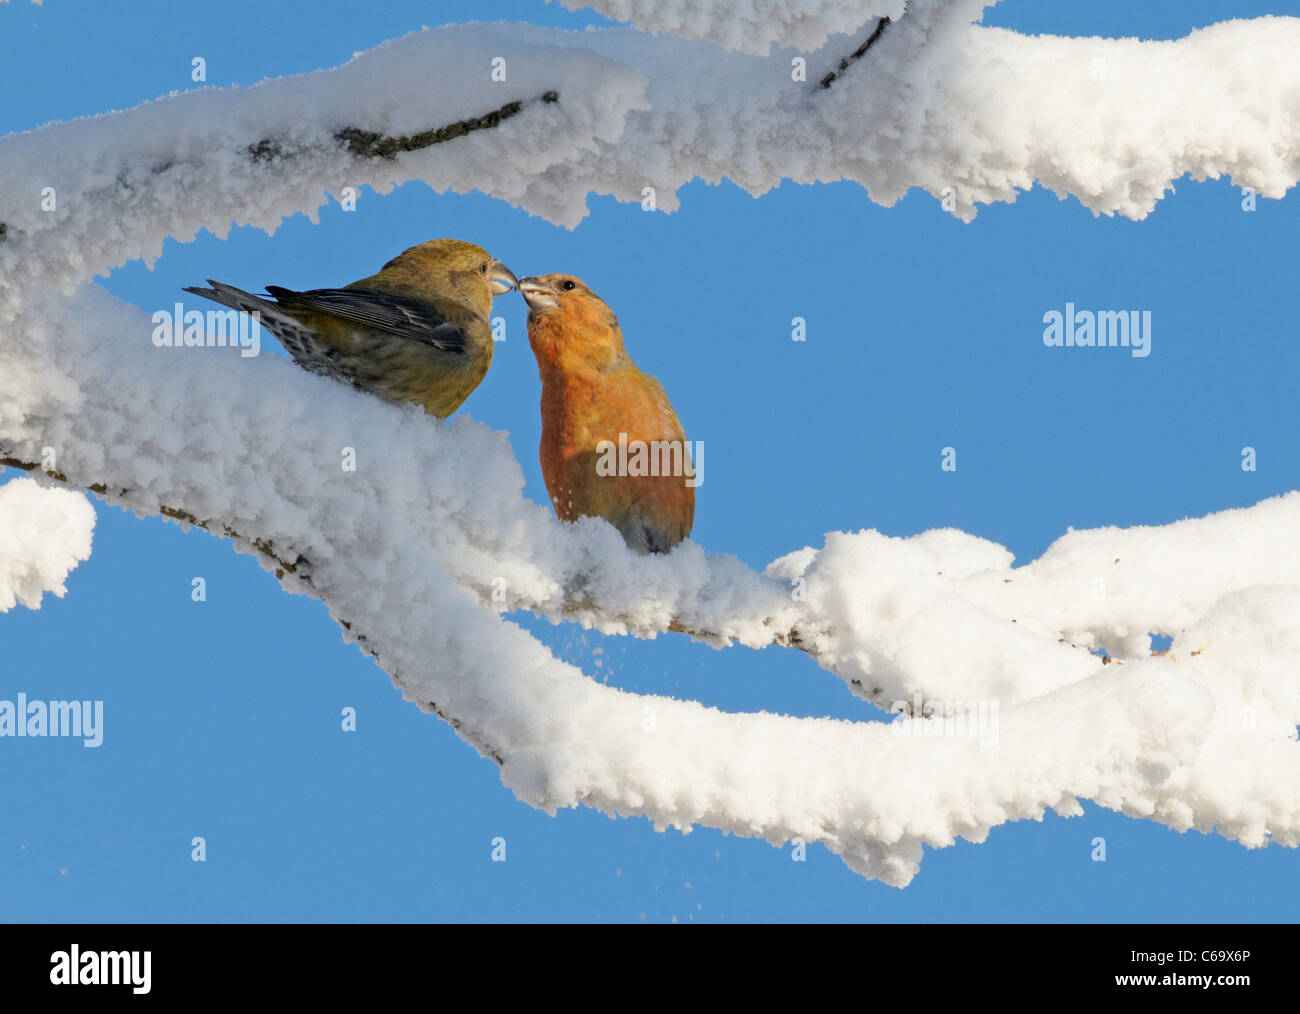 Common Crossbill, Red Crossbill (Loxia curvirostra). Tender couple perched on a snowy twig. Stock Photo